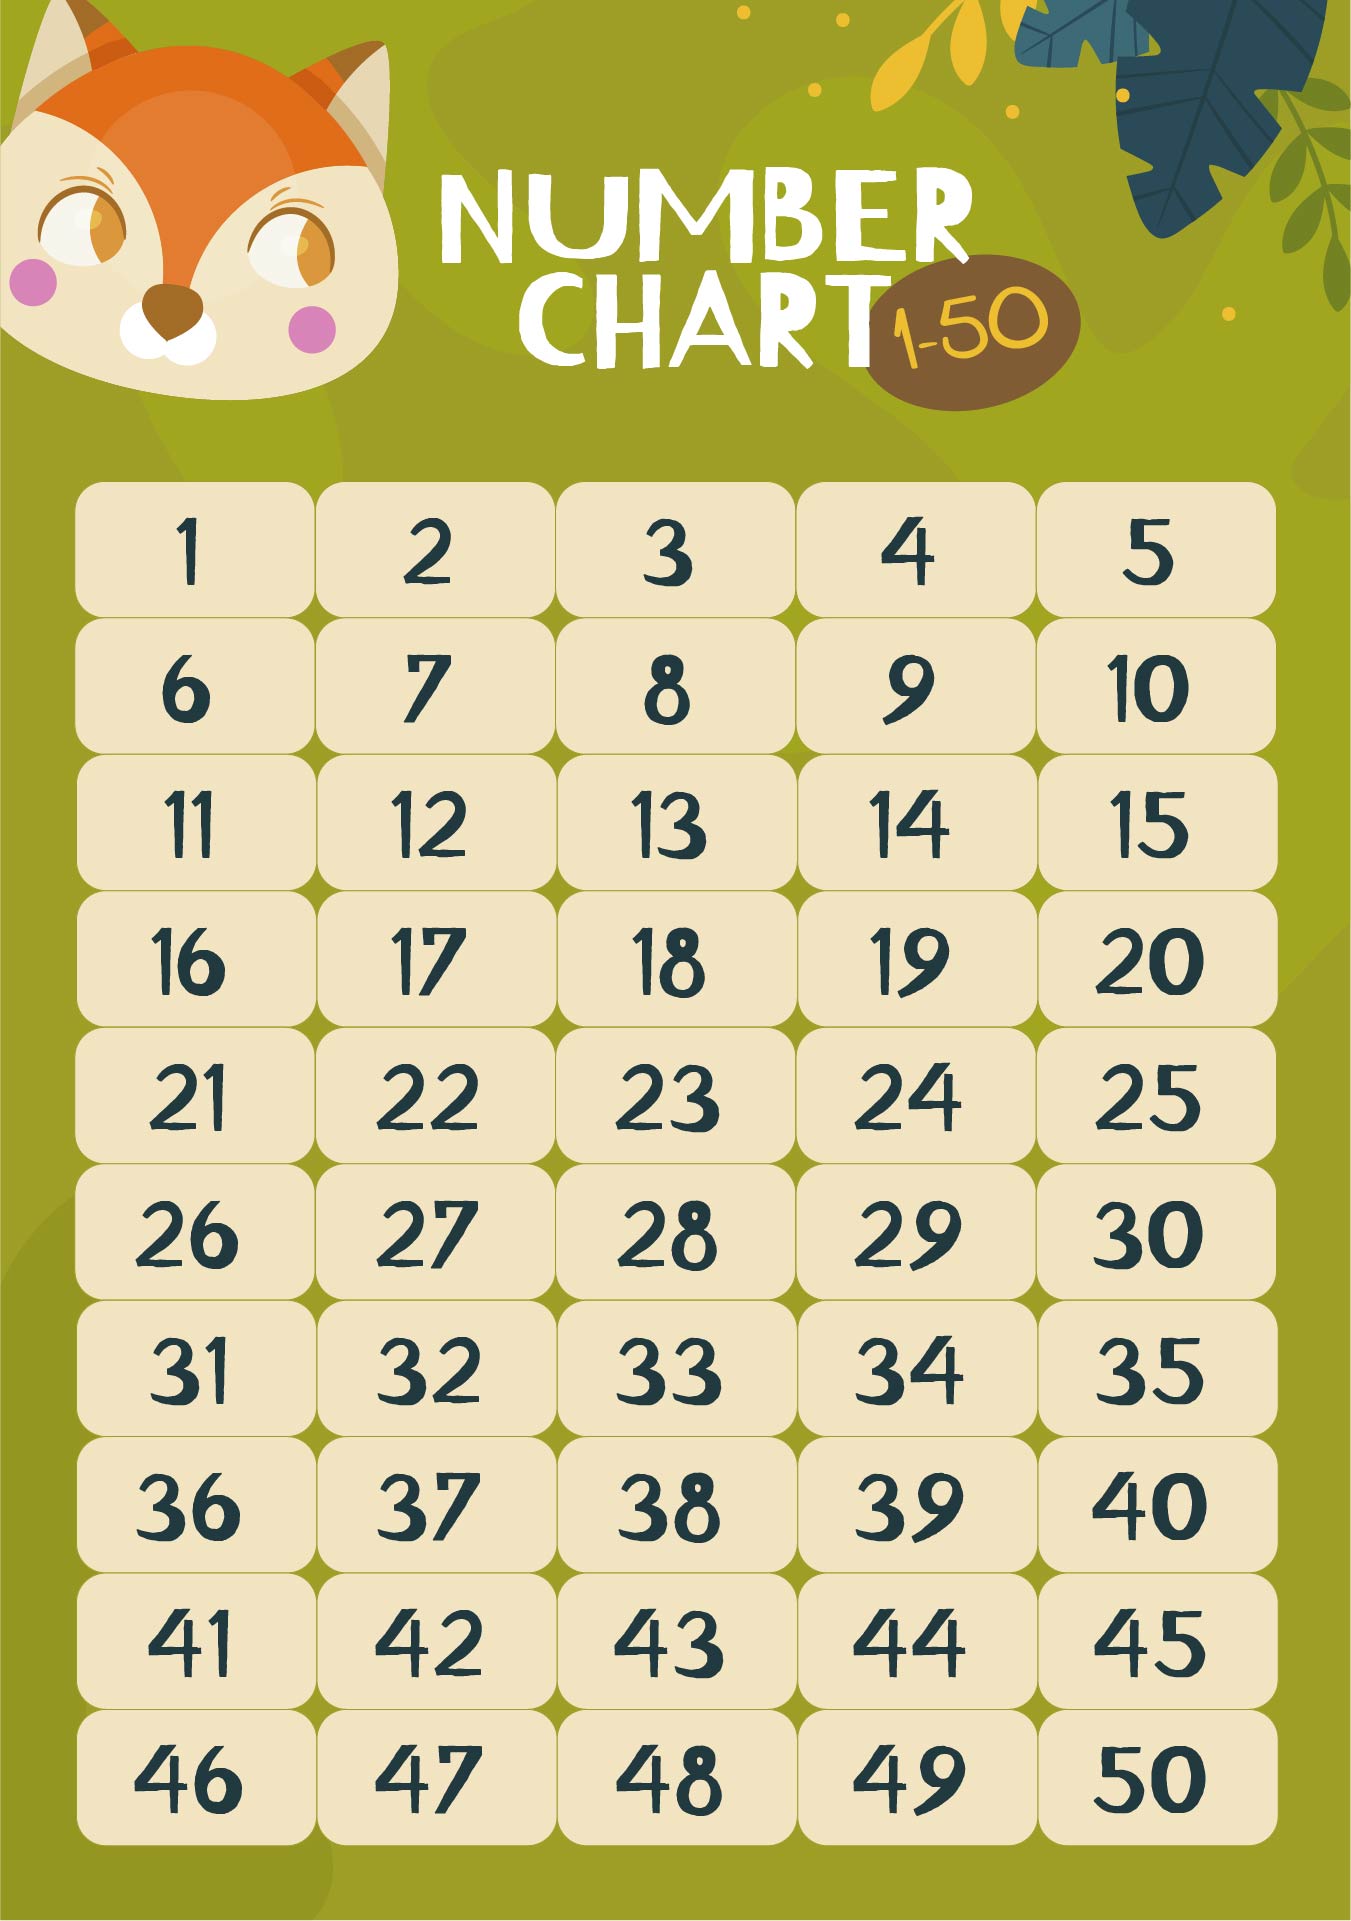 6-best-images-of-50-chart-printable-printable-number-1-50-worksheet-printable-number-chart-1